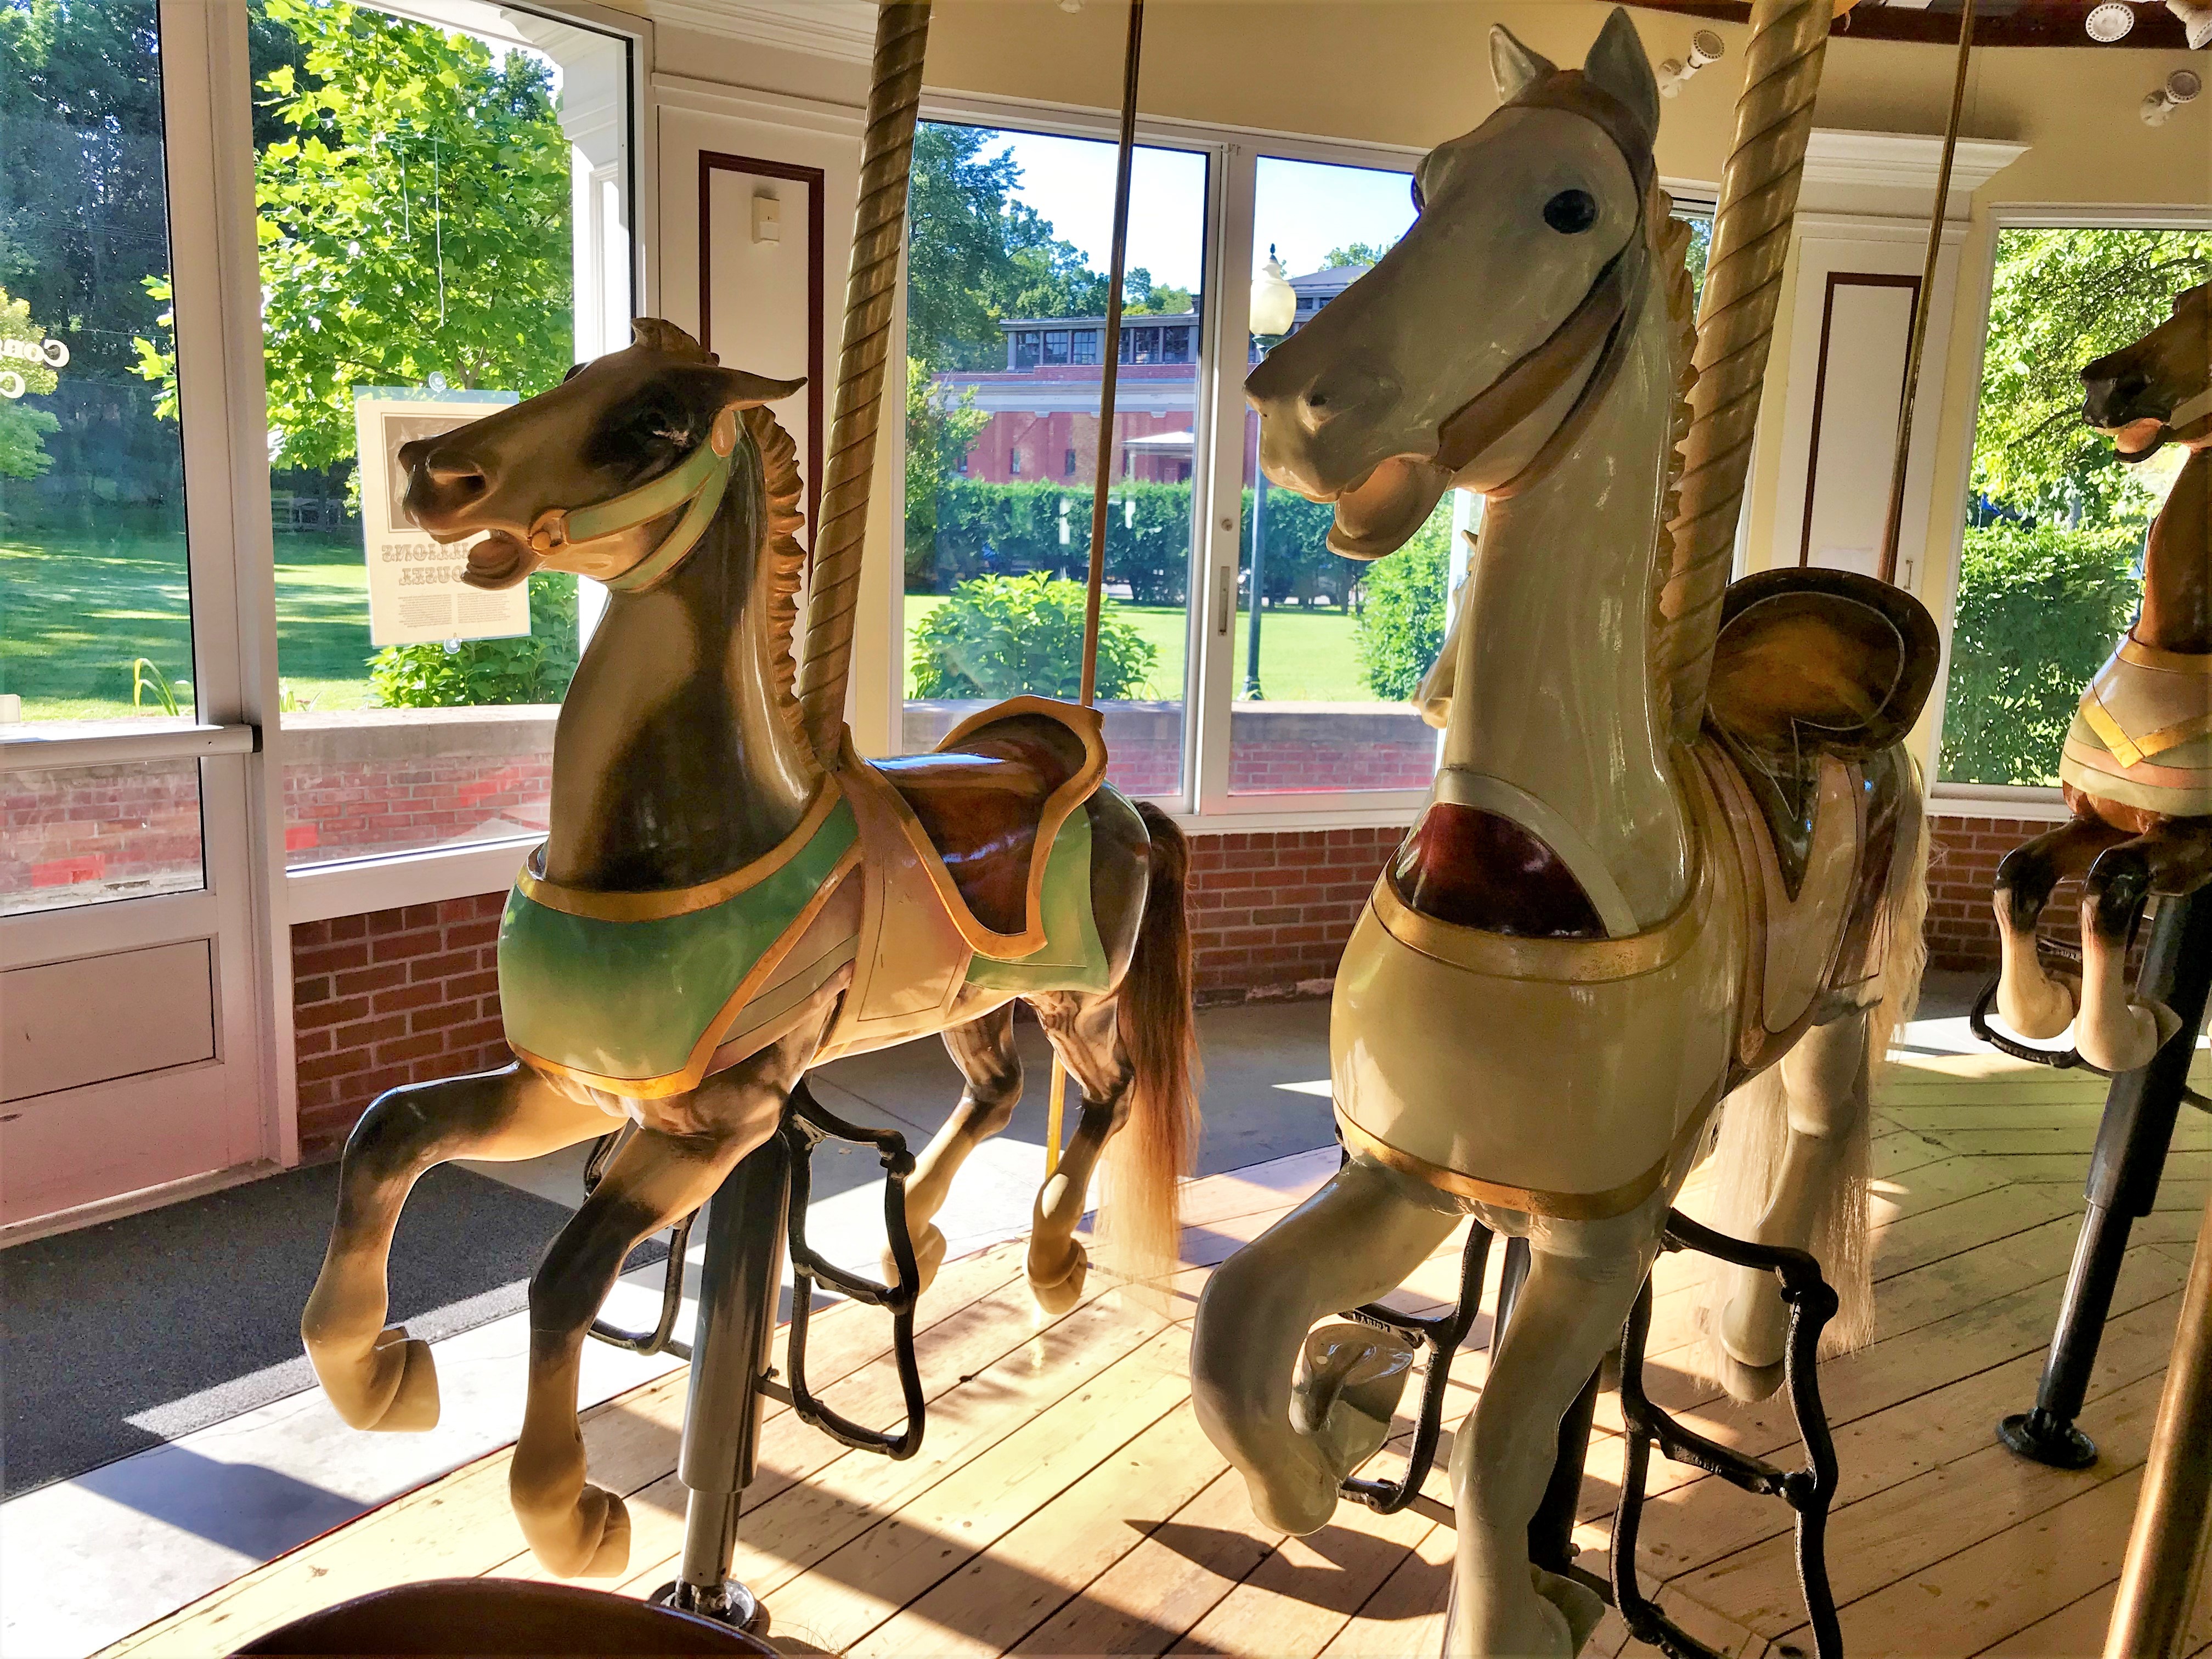 Two carousel horses side by side in the sunlight